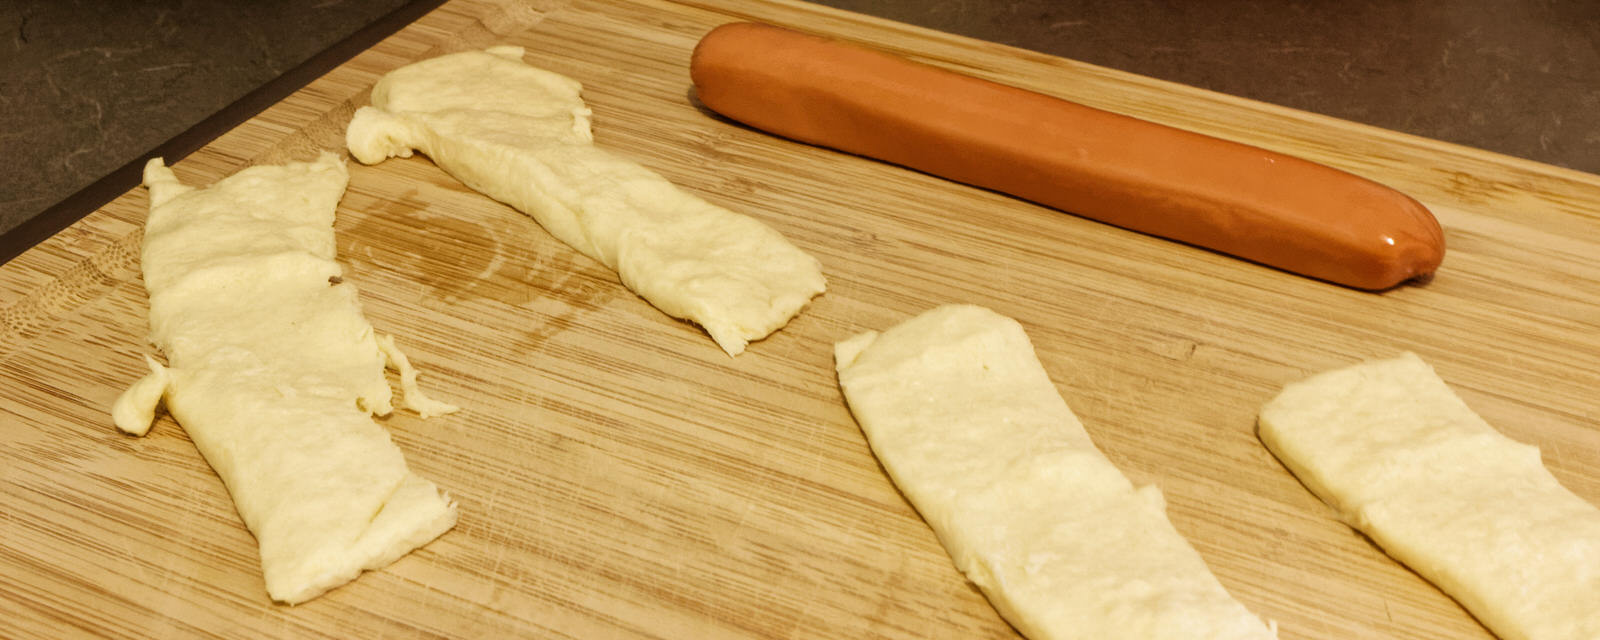 Pillsbury Crescent stripes on a cutting board with a wiener sausage